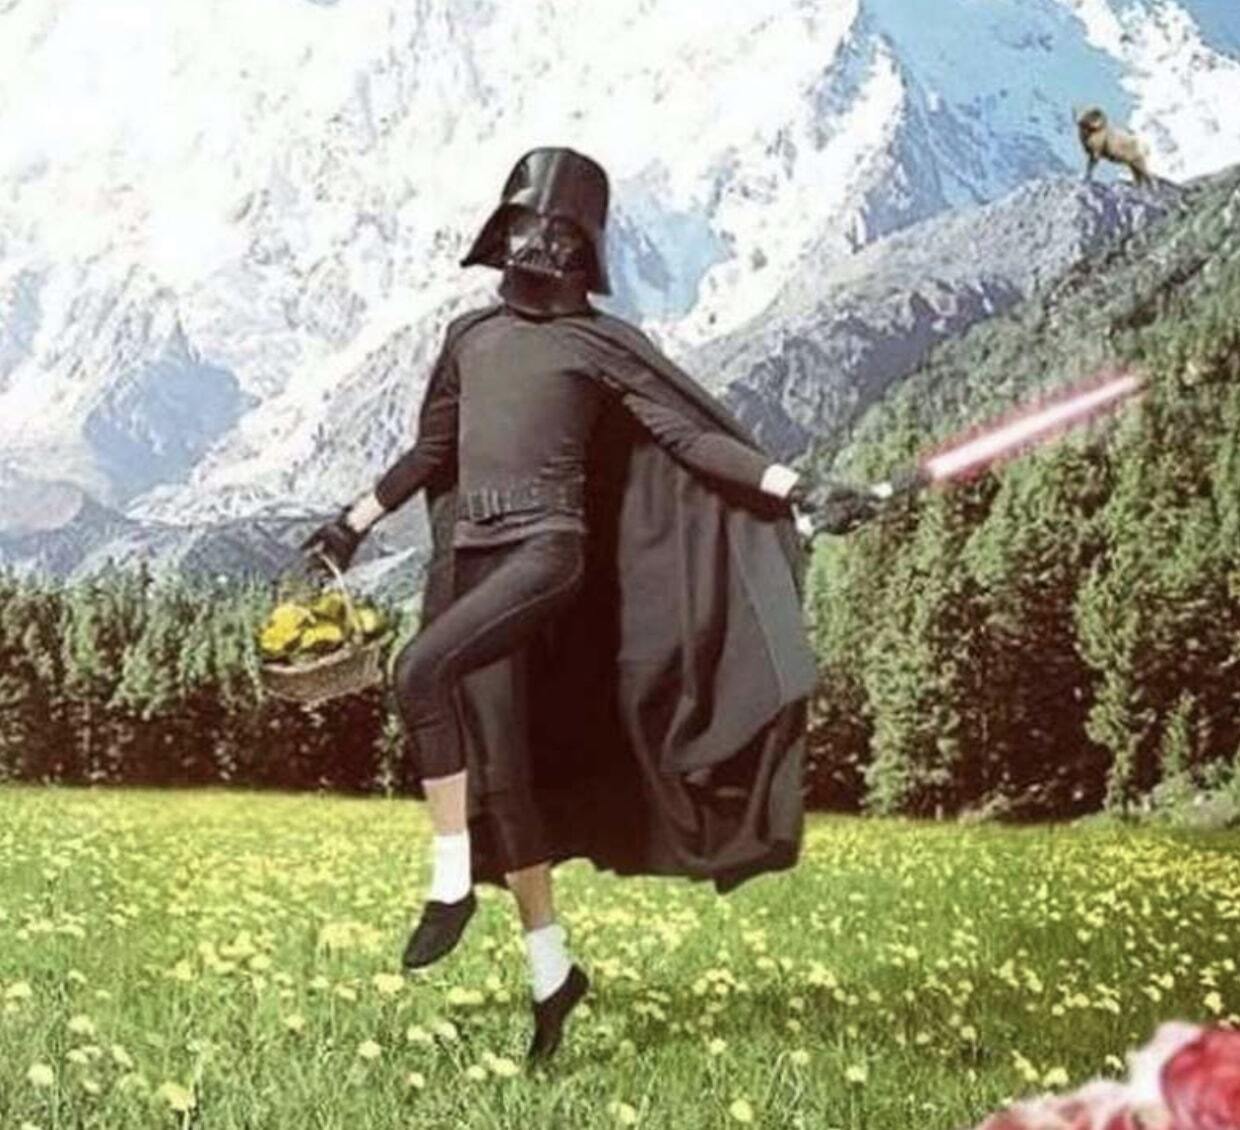 Darth Vader skipping in the countryside